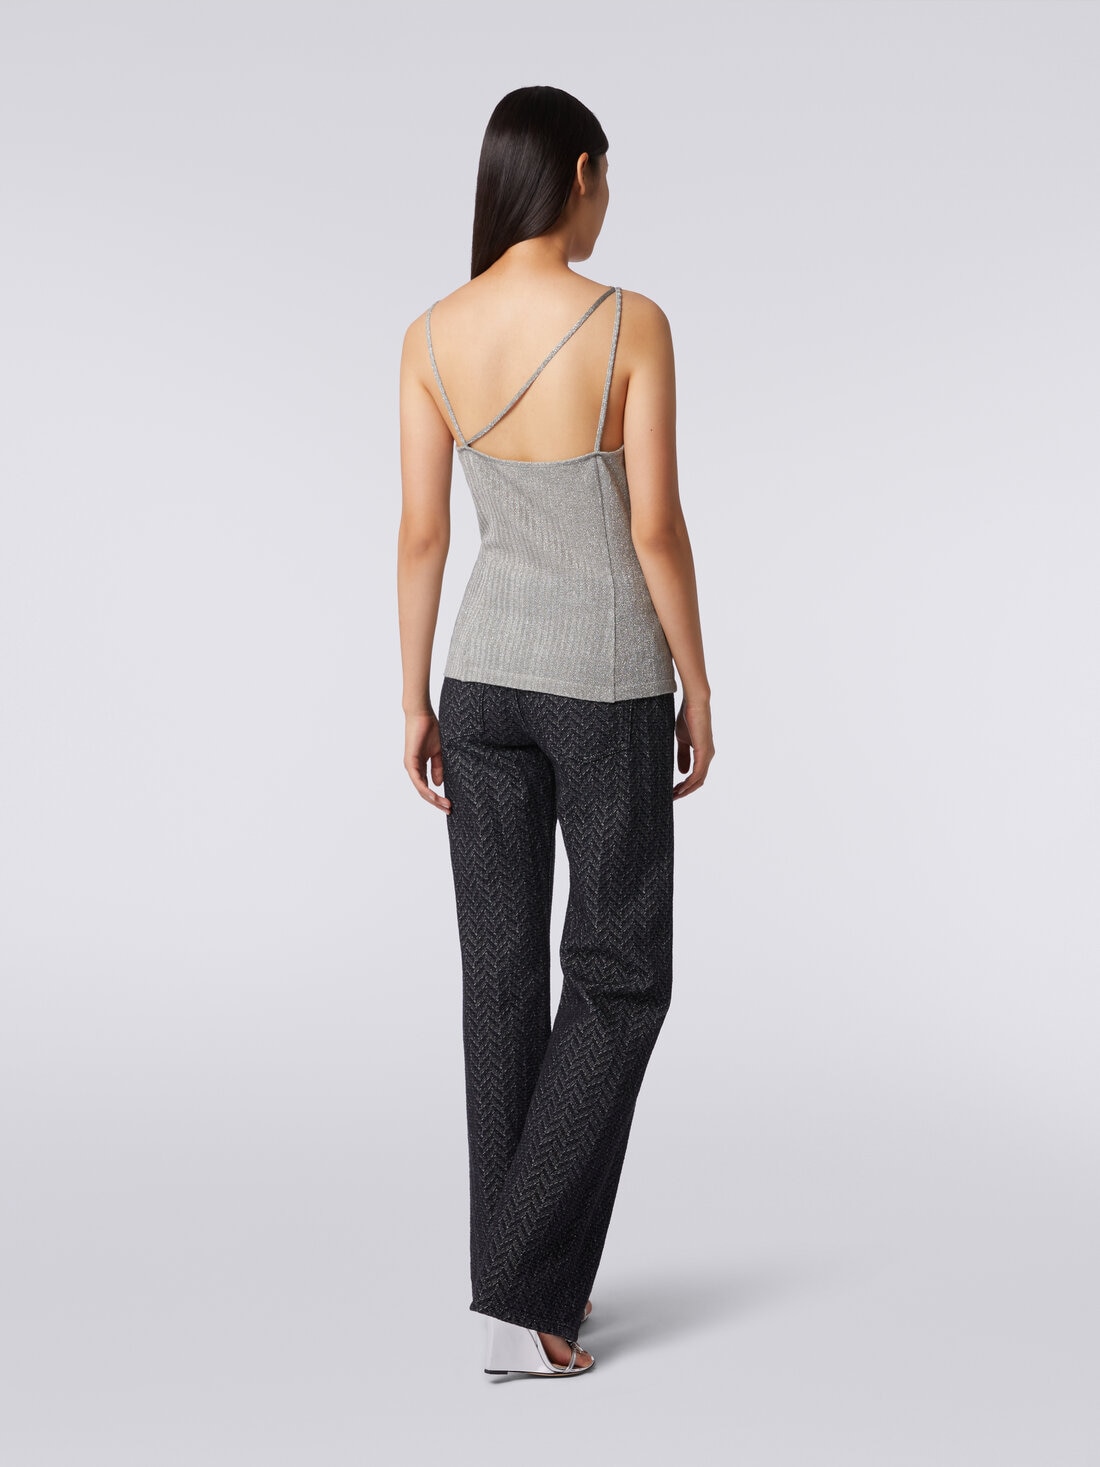 Cotton and viscose lamé tank top, Grey - DS23WK25BR00WNS91IT - 3